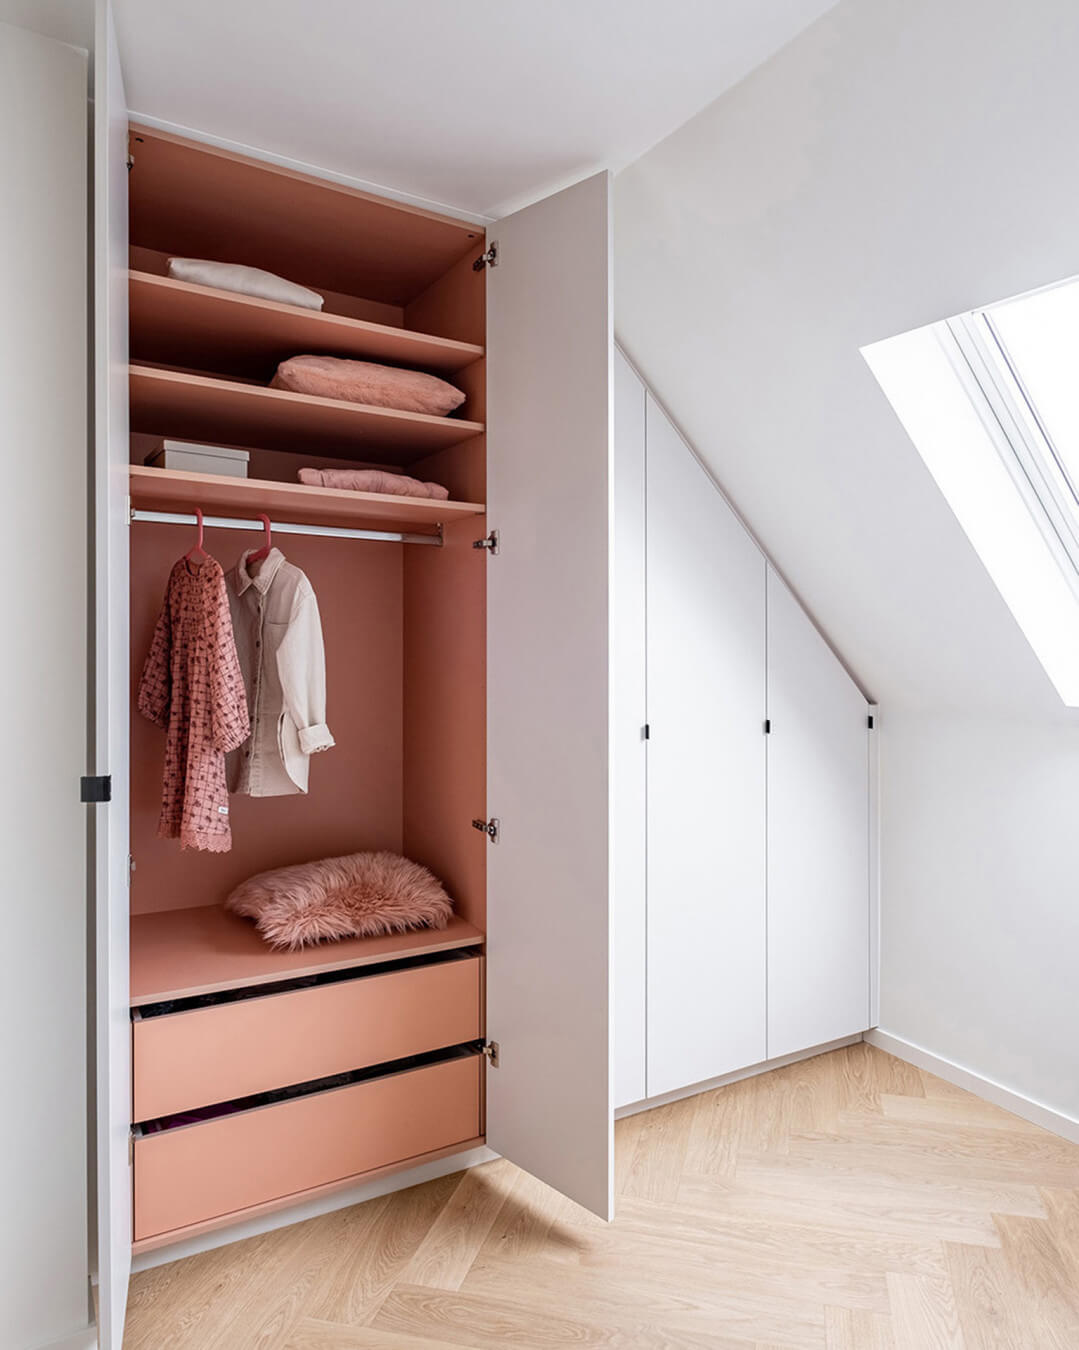 Custom-made wardrobe designed for an angled ceiling, featuring Dusty Coral as the interior color